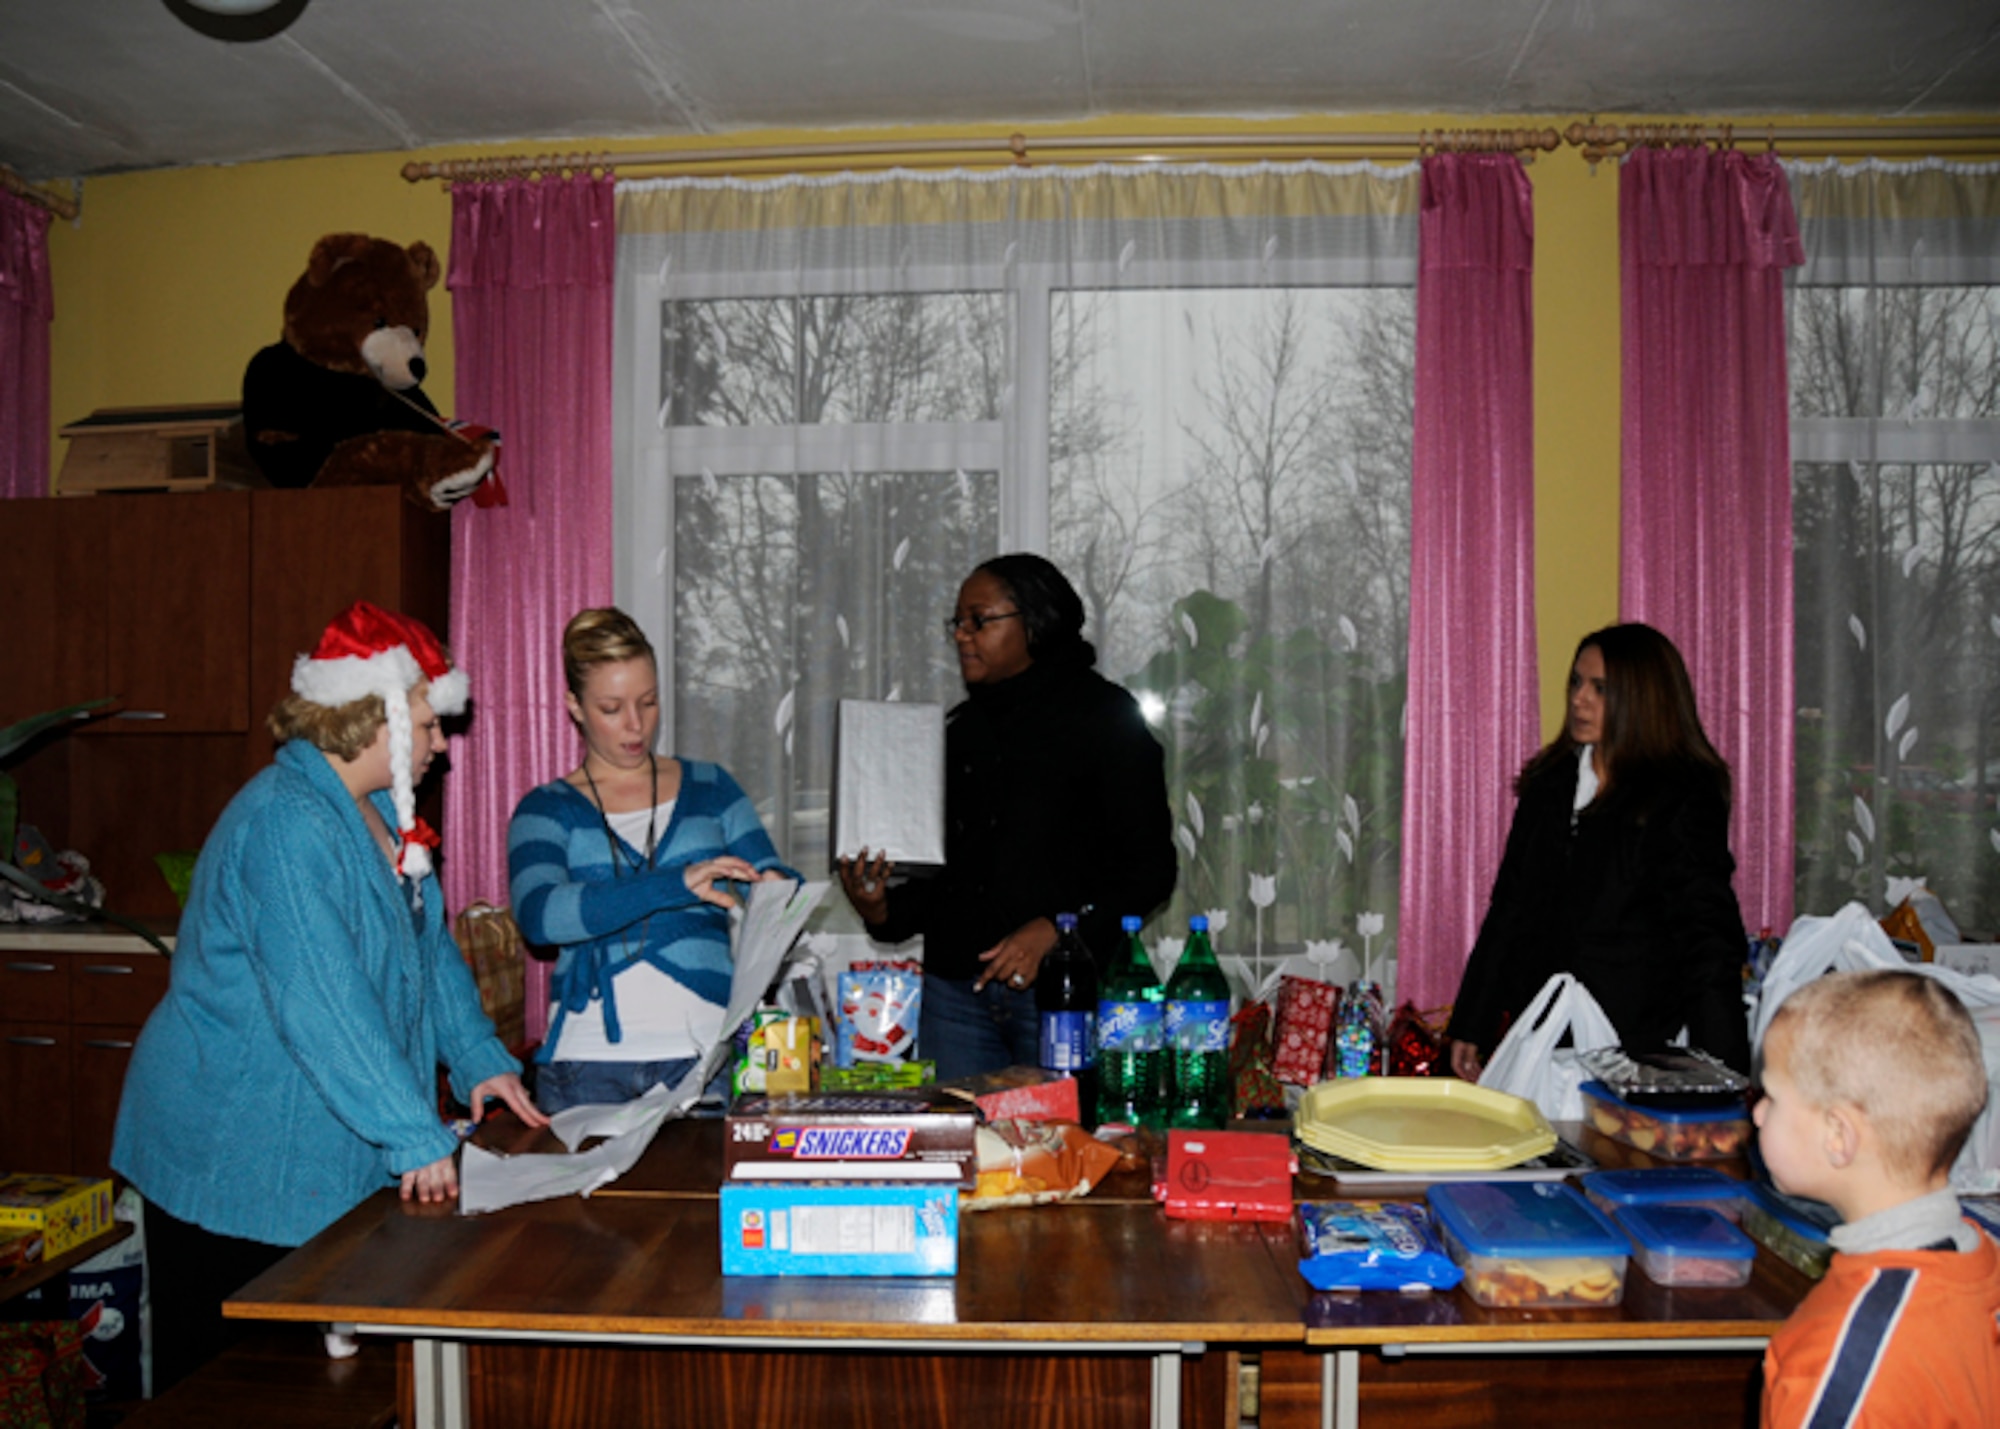 Master Sgt. Margaret Williams, Senior Airman Hannah Parker, Tech. Sgt. Kenya Meyers and Airman 1st Class Samantha Melendez, 493rd Expeditionary Fighter Squadron, hand out presents at the Kelme District Vijurkai Children’s Home Dec. 19 in Lithuania. More than 100 Airmen supporting the NATO Baltic Air Policing mission in Siauliai, Lithuania threw a holiday party for the children to spread their generosity and holiday cheer.